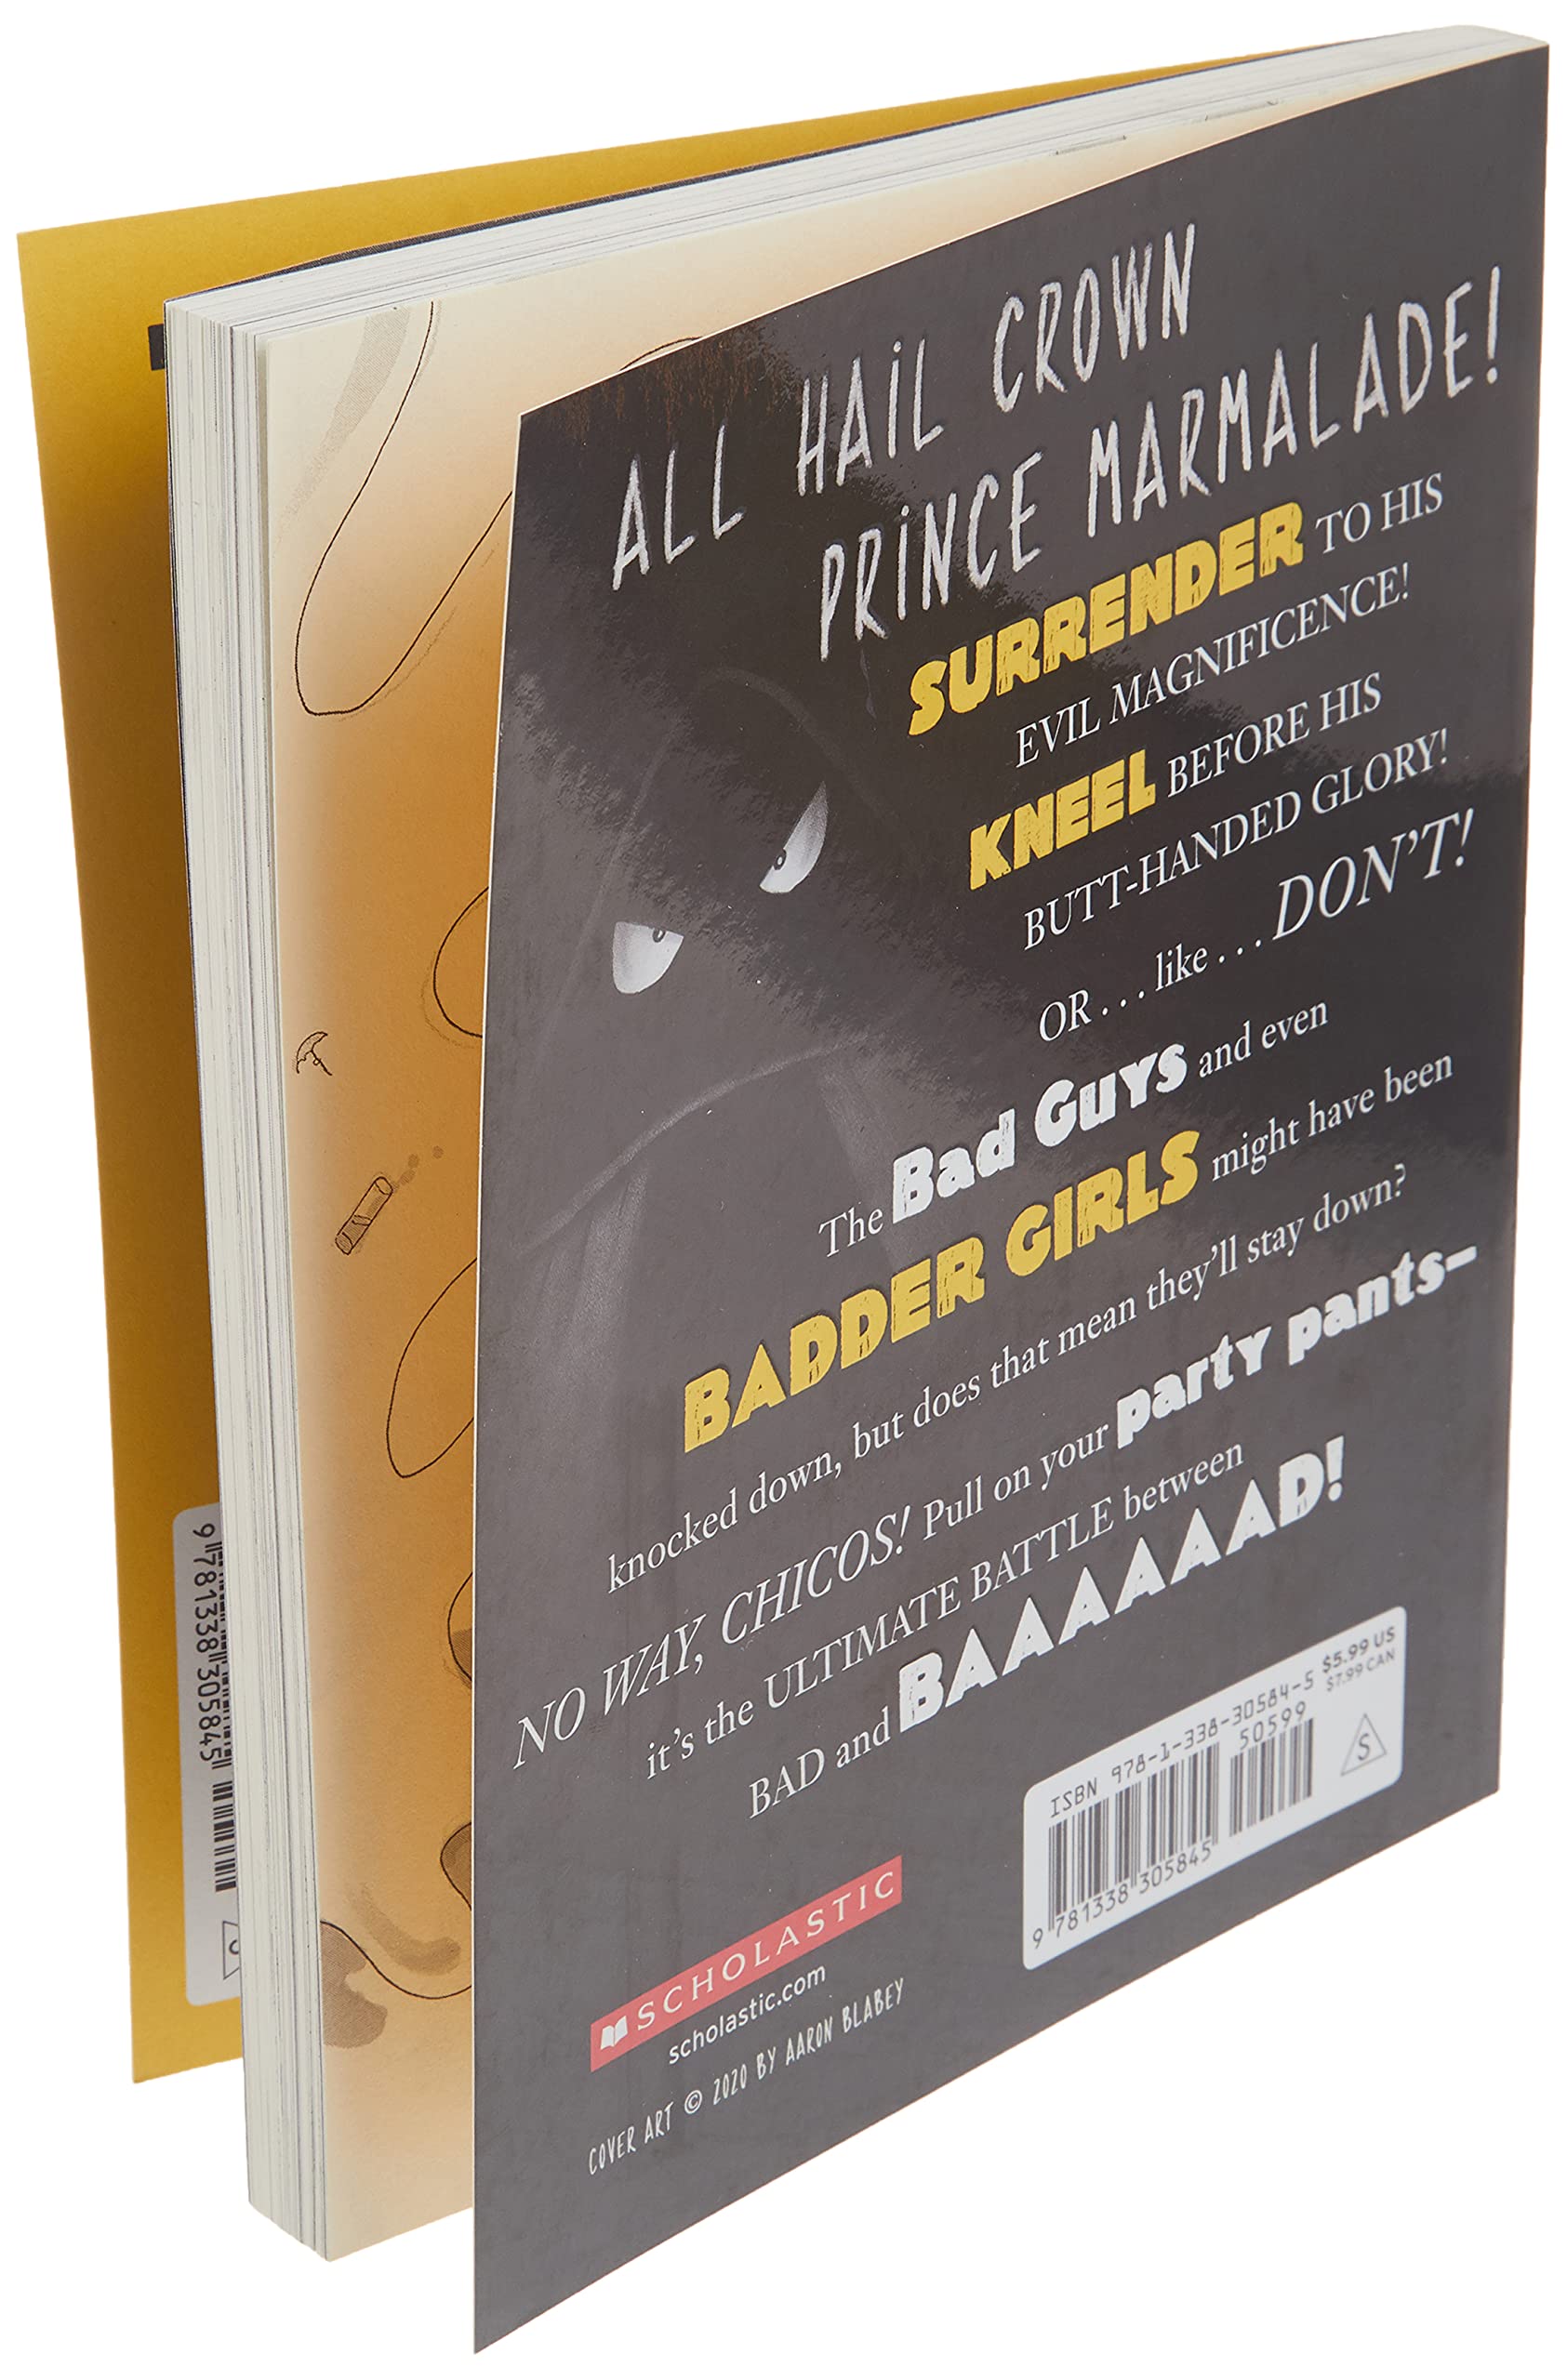 The Bad Guys in the Baddest Day Ever (The Bad Guys #10) - The English Bookshop Kuwait